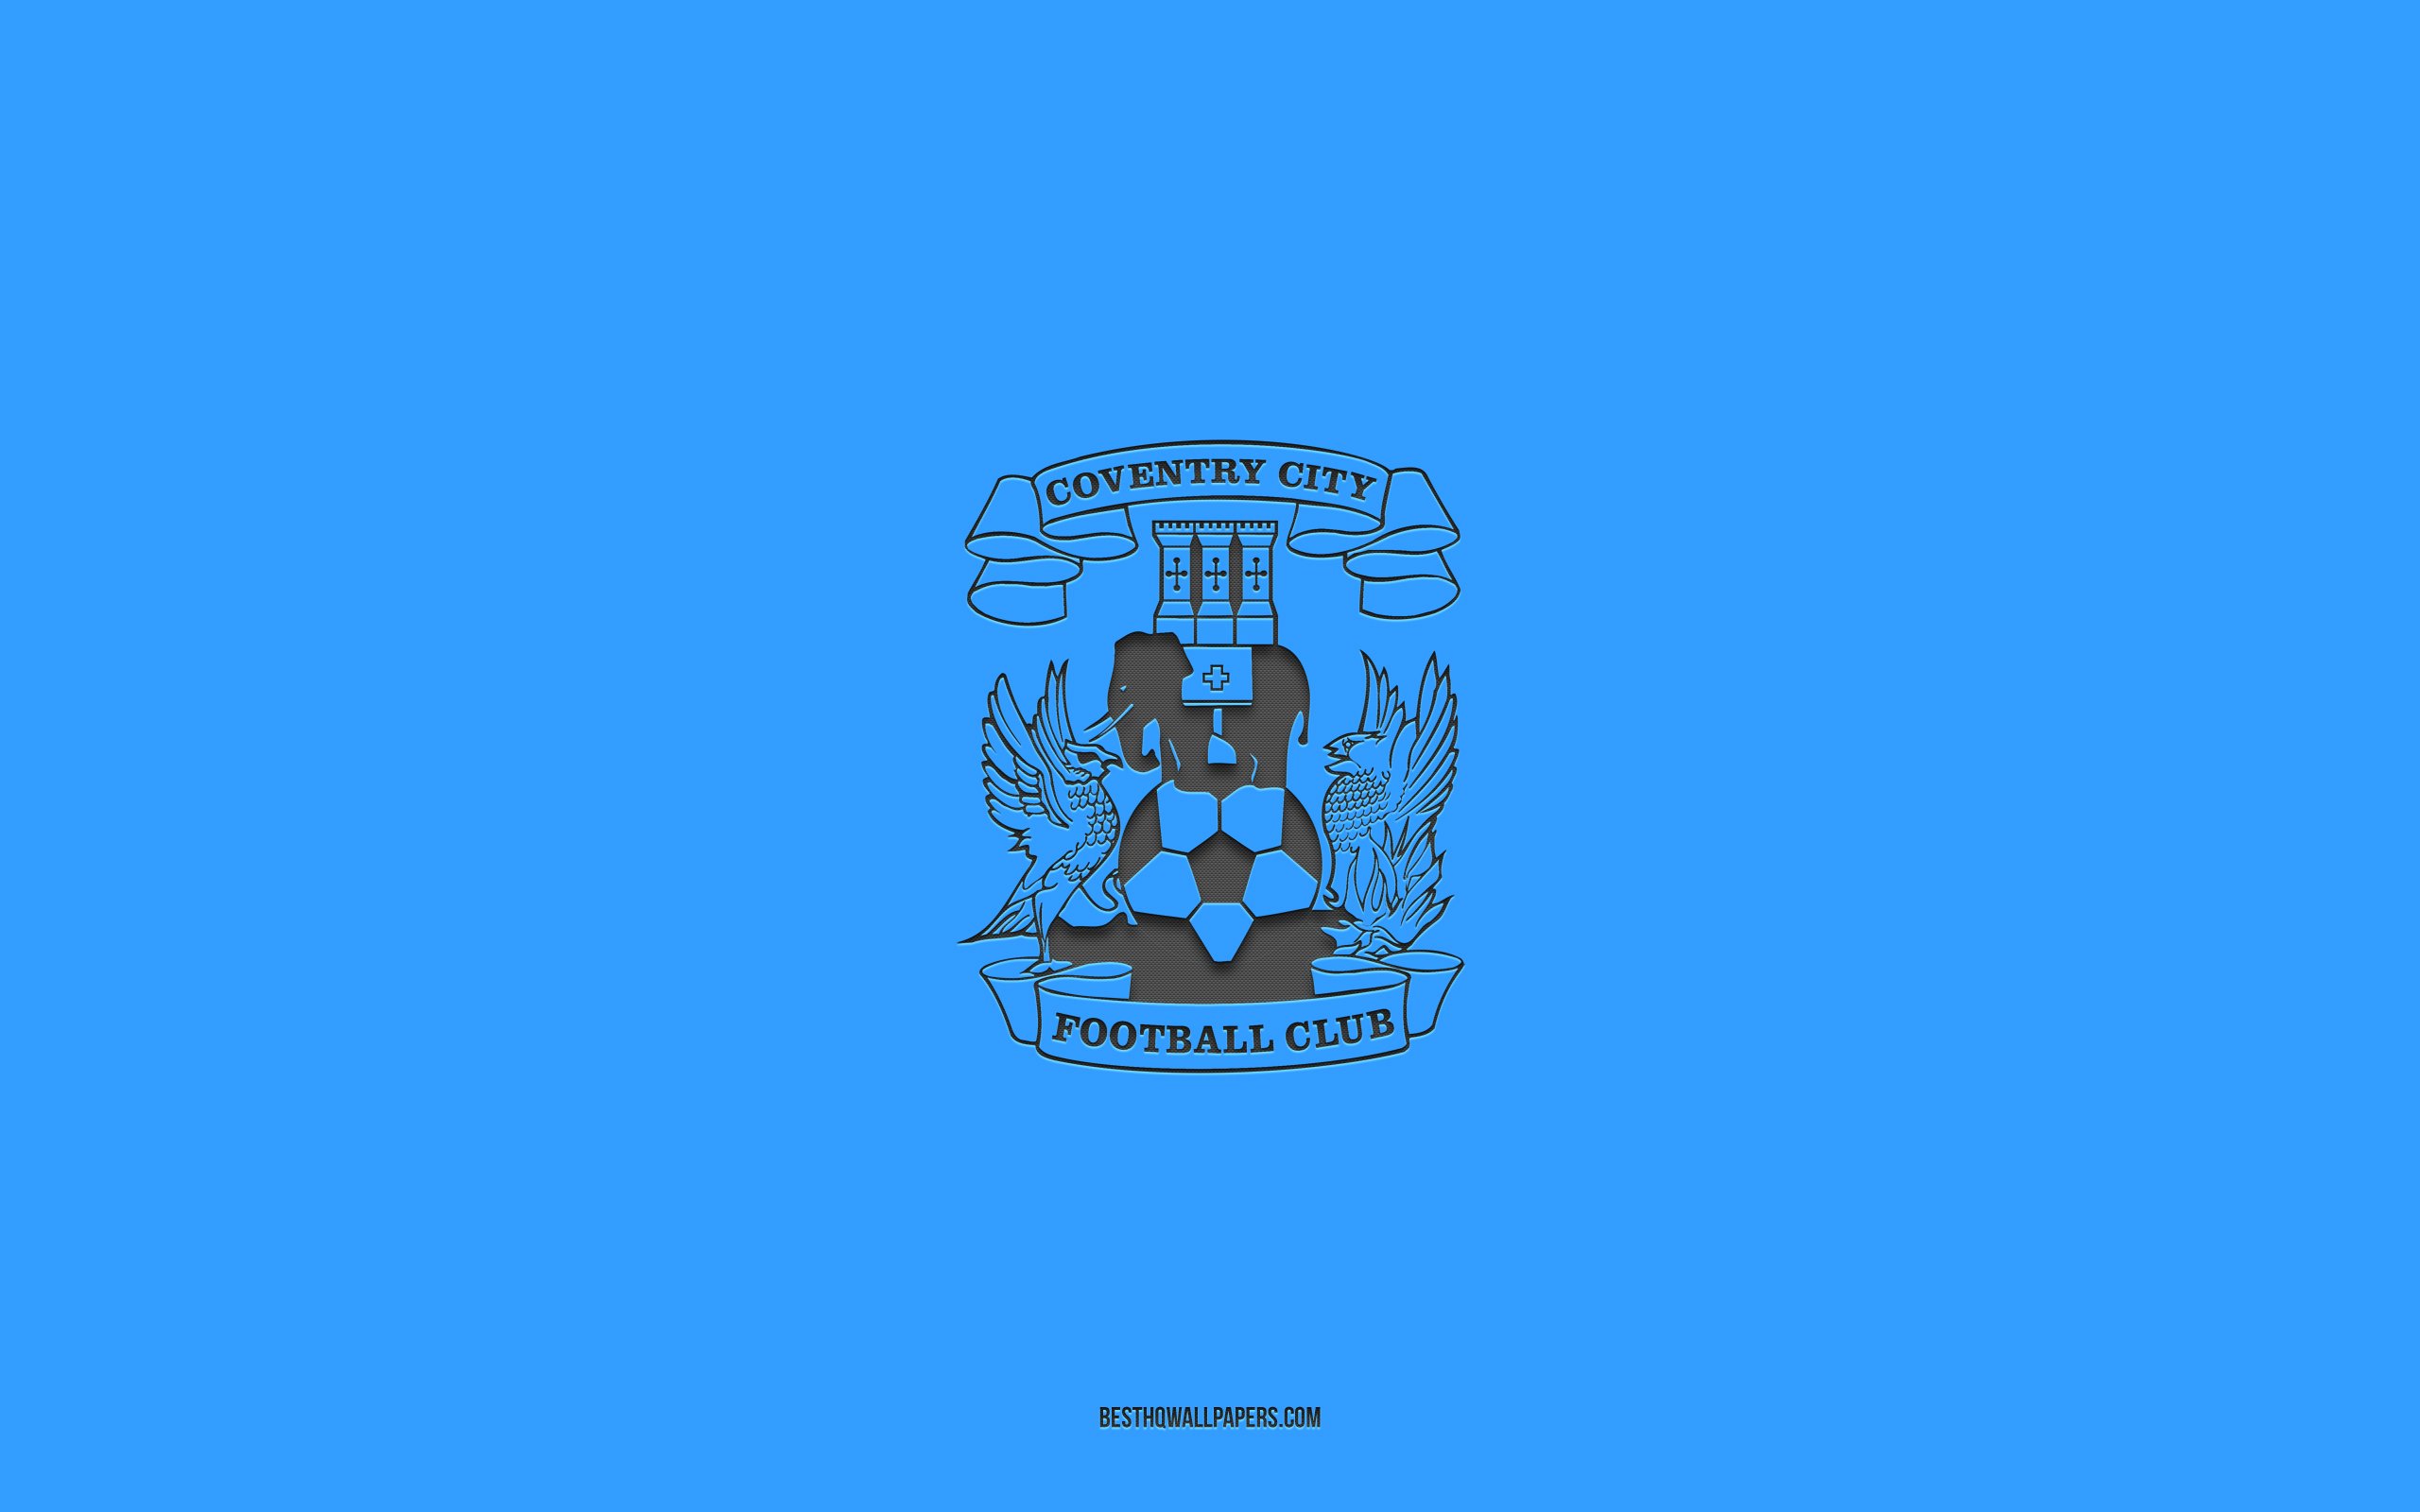 Download wallpaper Coventry City FC, blue background, English football team, Coventry City FC emblem, EFL Championship, Coventry City, England, football, Coventry City FC logo for desktop with resolution 2560x1600. High Quality HD